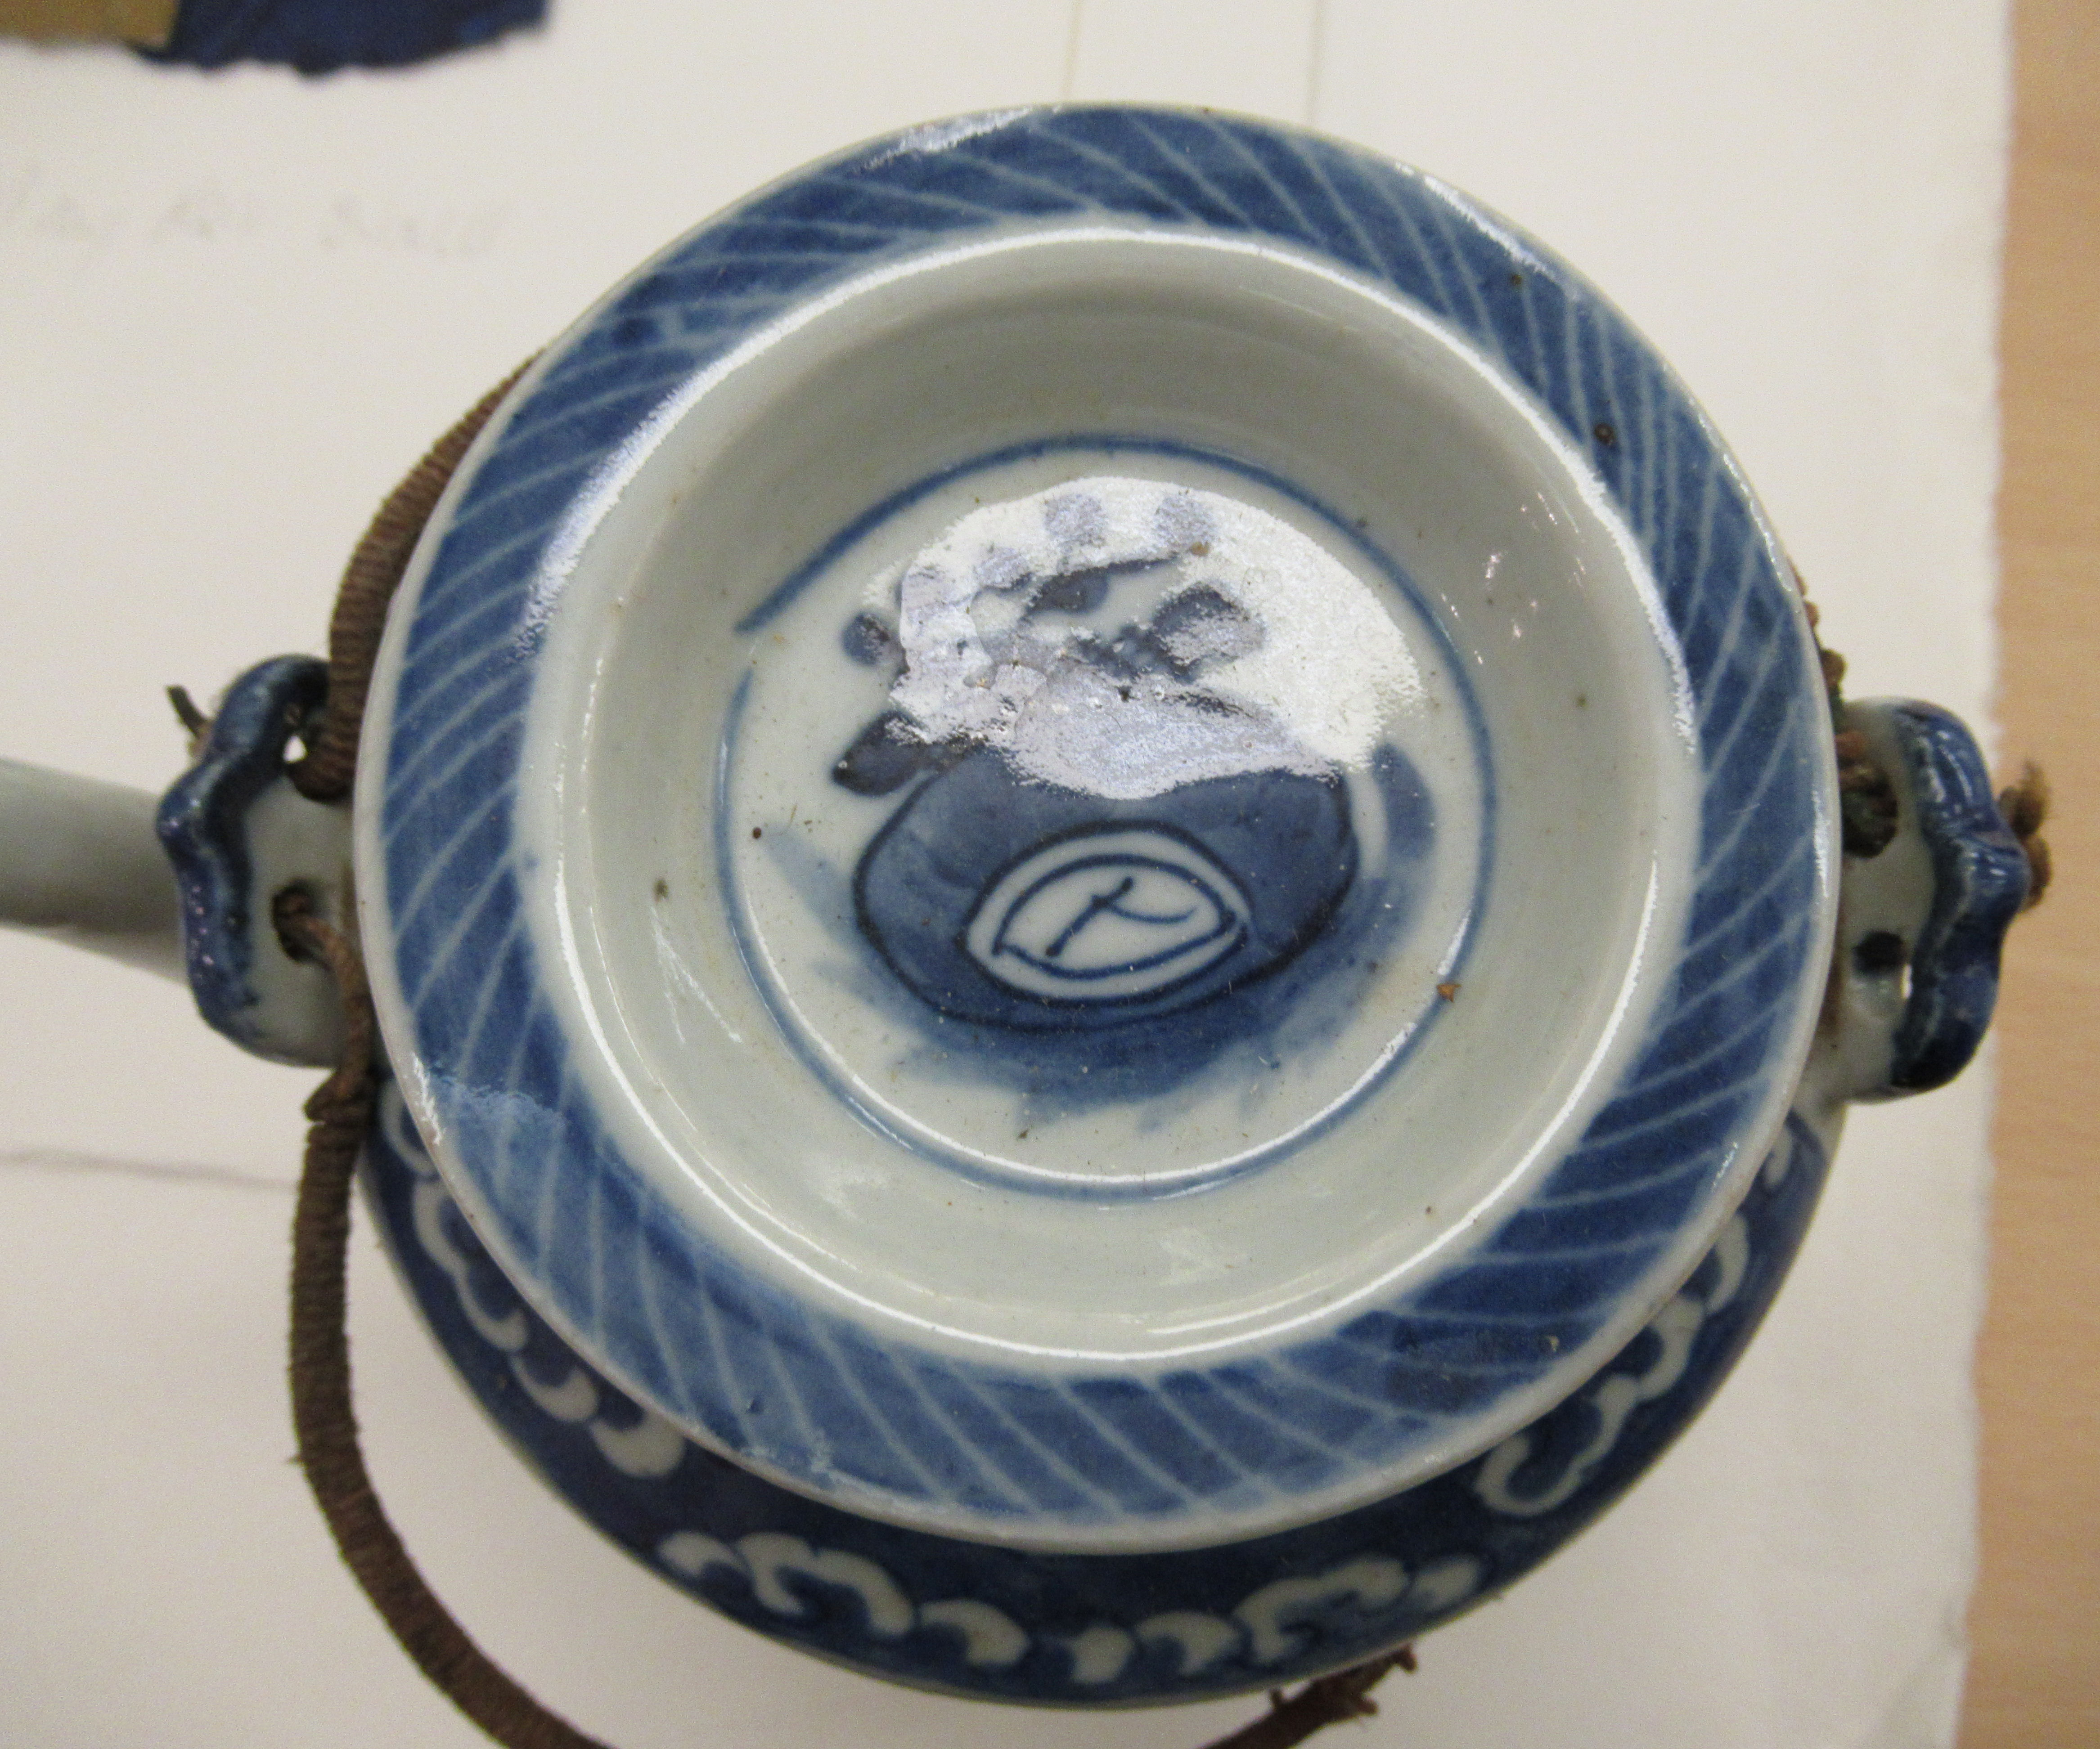 An early 20thC Chinese porcelain teapot of cylindrical form with a cover, set in an upholstered, - Image 3 of 5